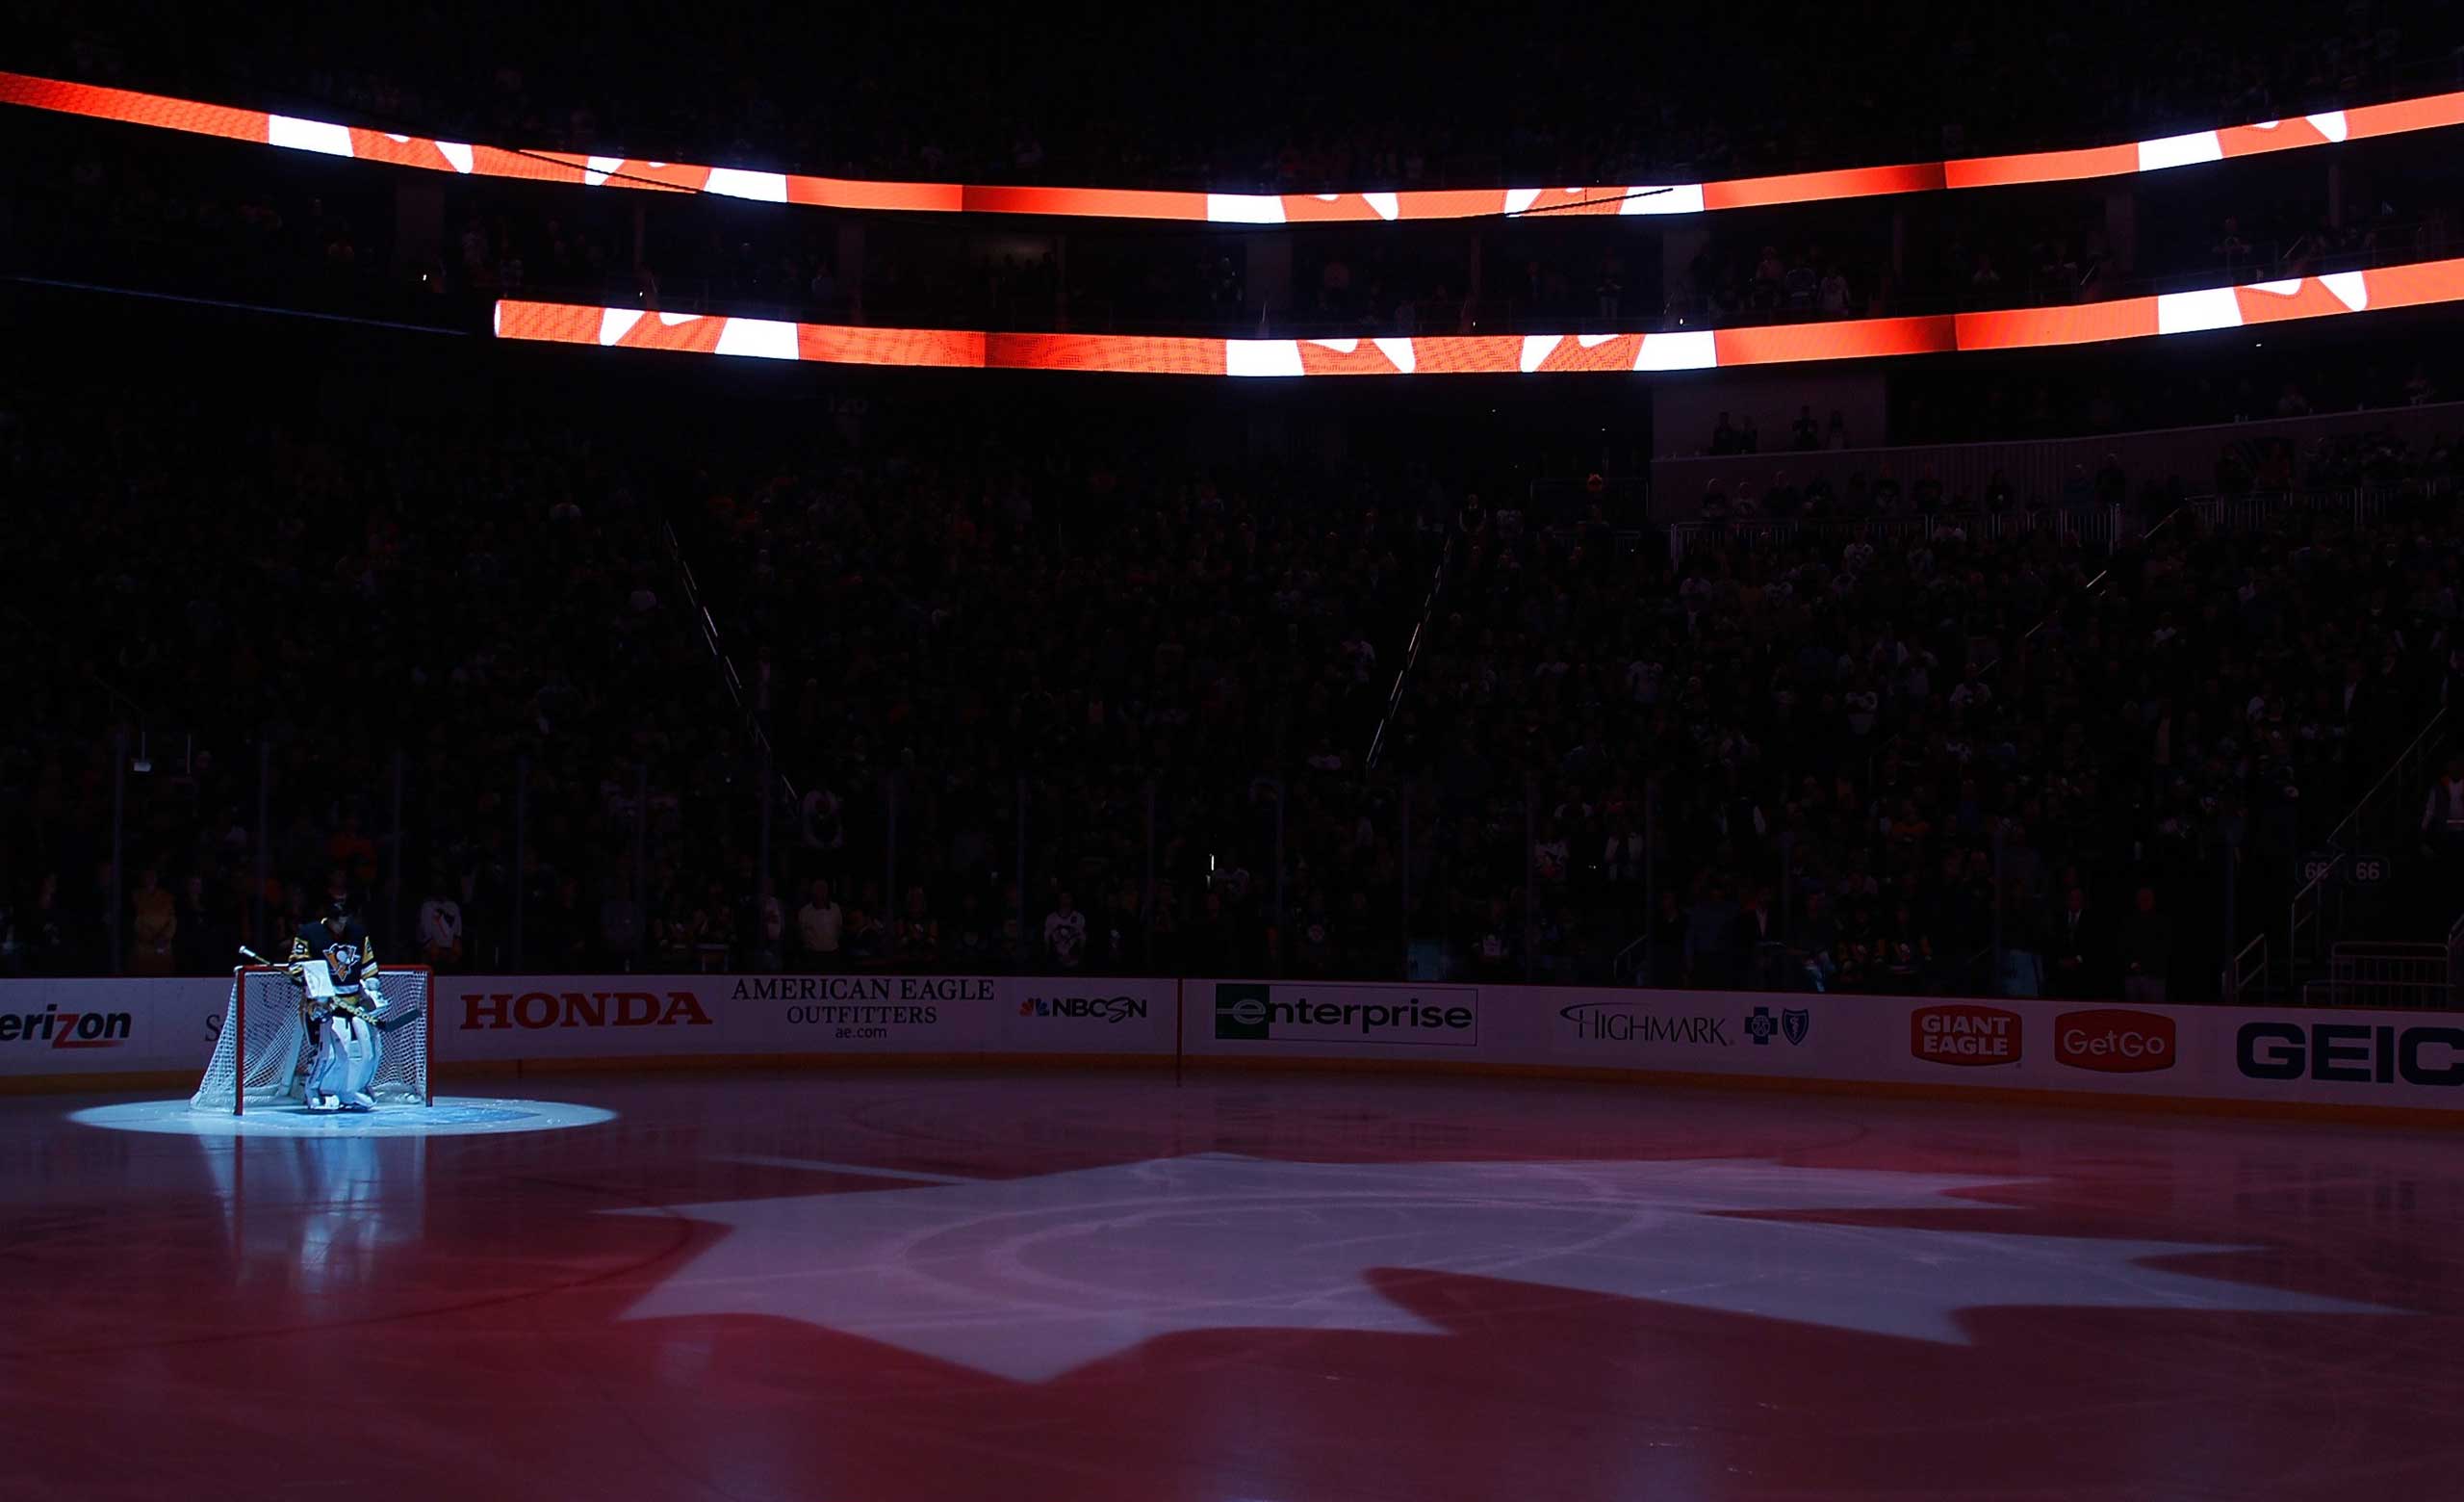 The Canadian National Anthem is performed in honor of the shooting victims in Ottawa during the game between the Philadelphia Flyers and Pittsburgh Penguins at Consol Energy Center on Oct. 22, 2014 in Pittsburgh, Pa. (Gregory Shamus—NHLI/Getty Images)